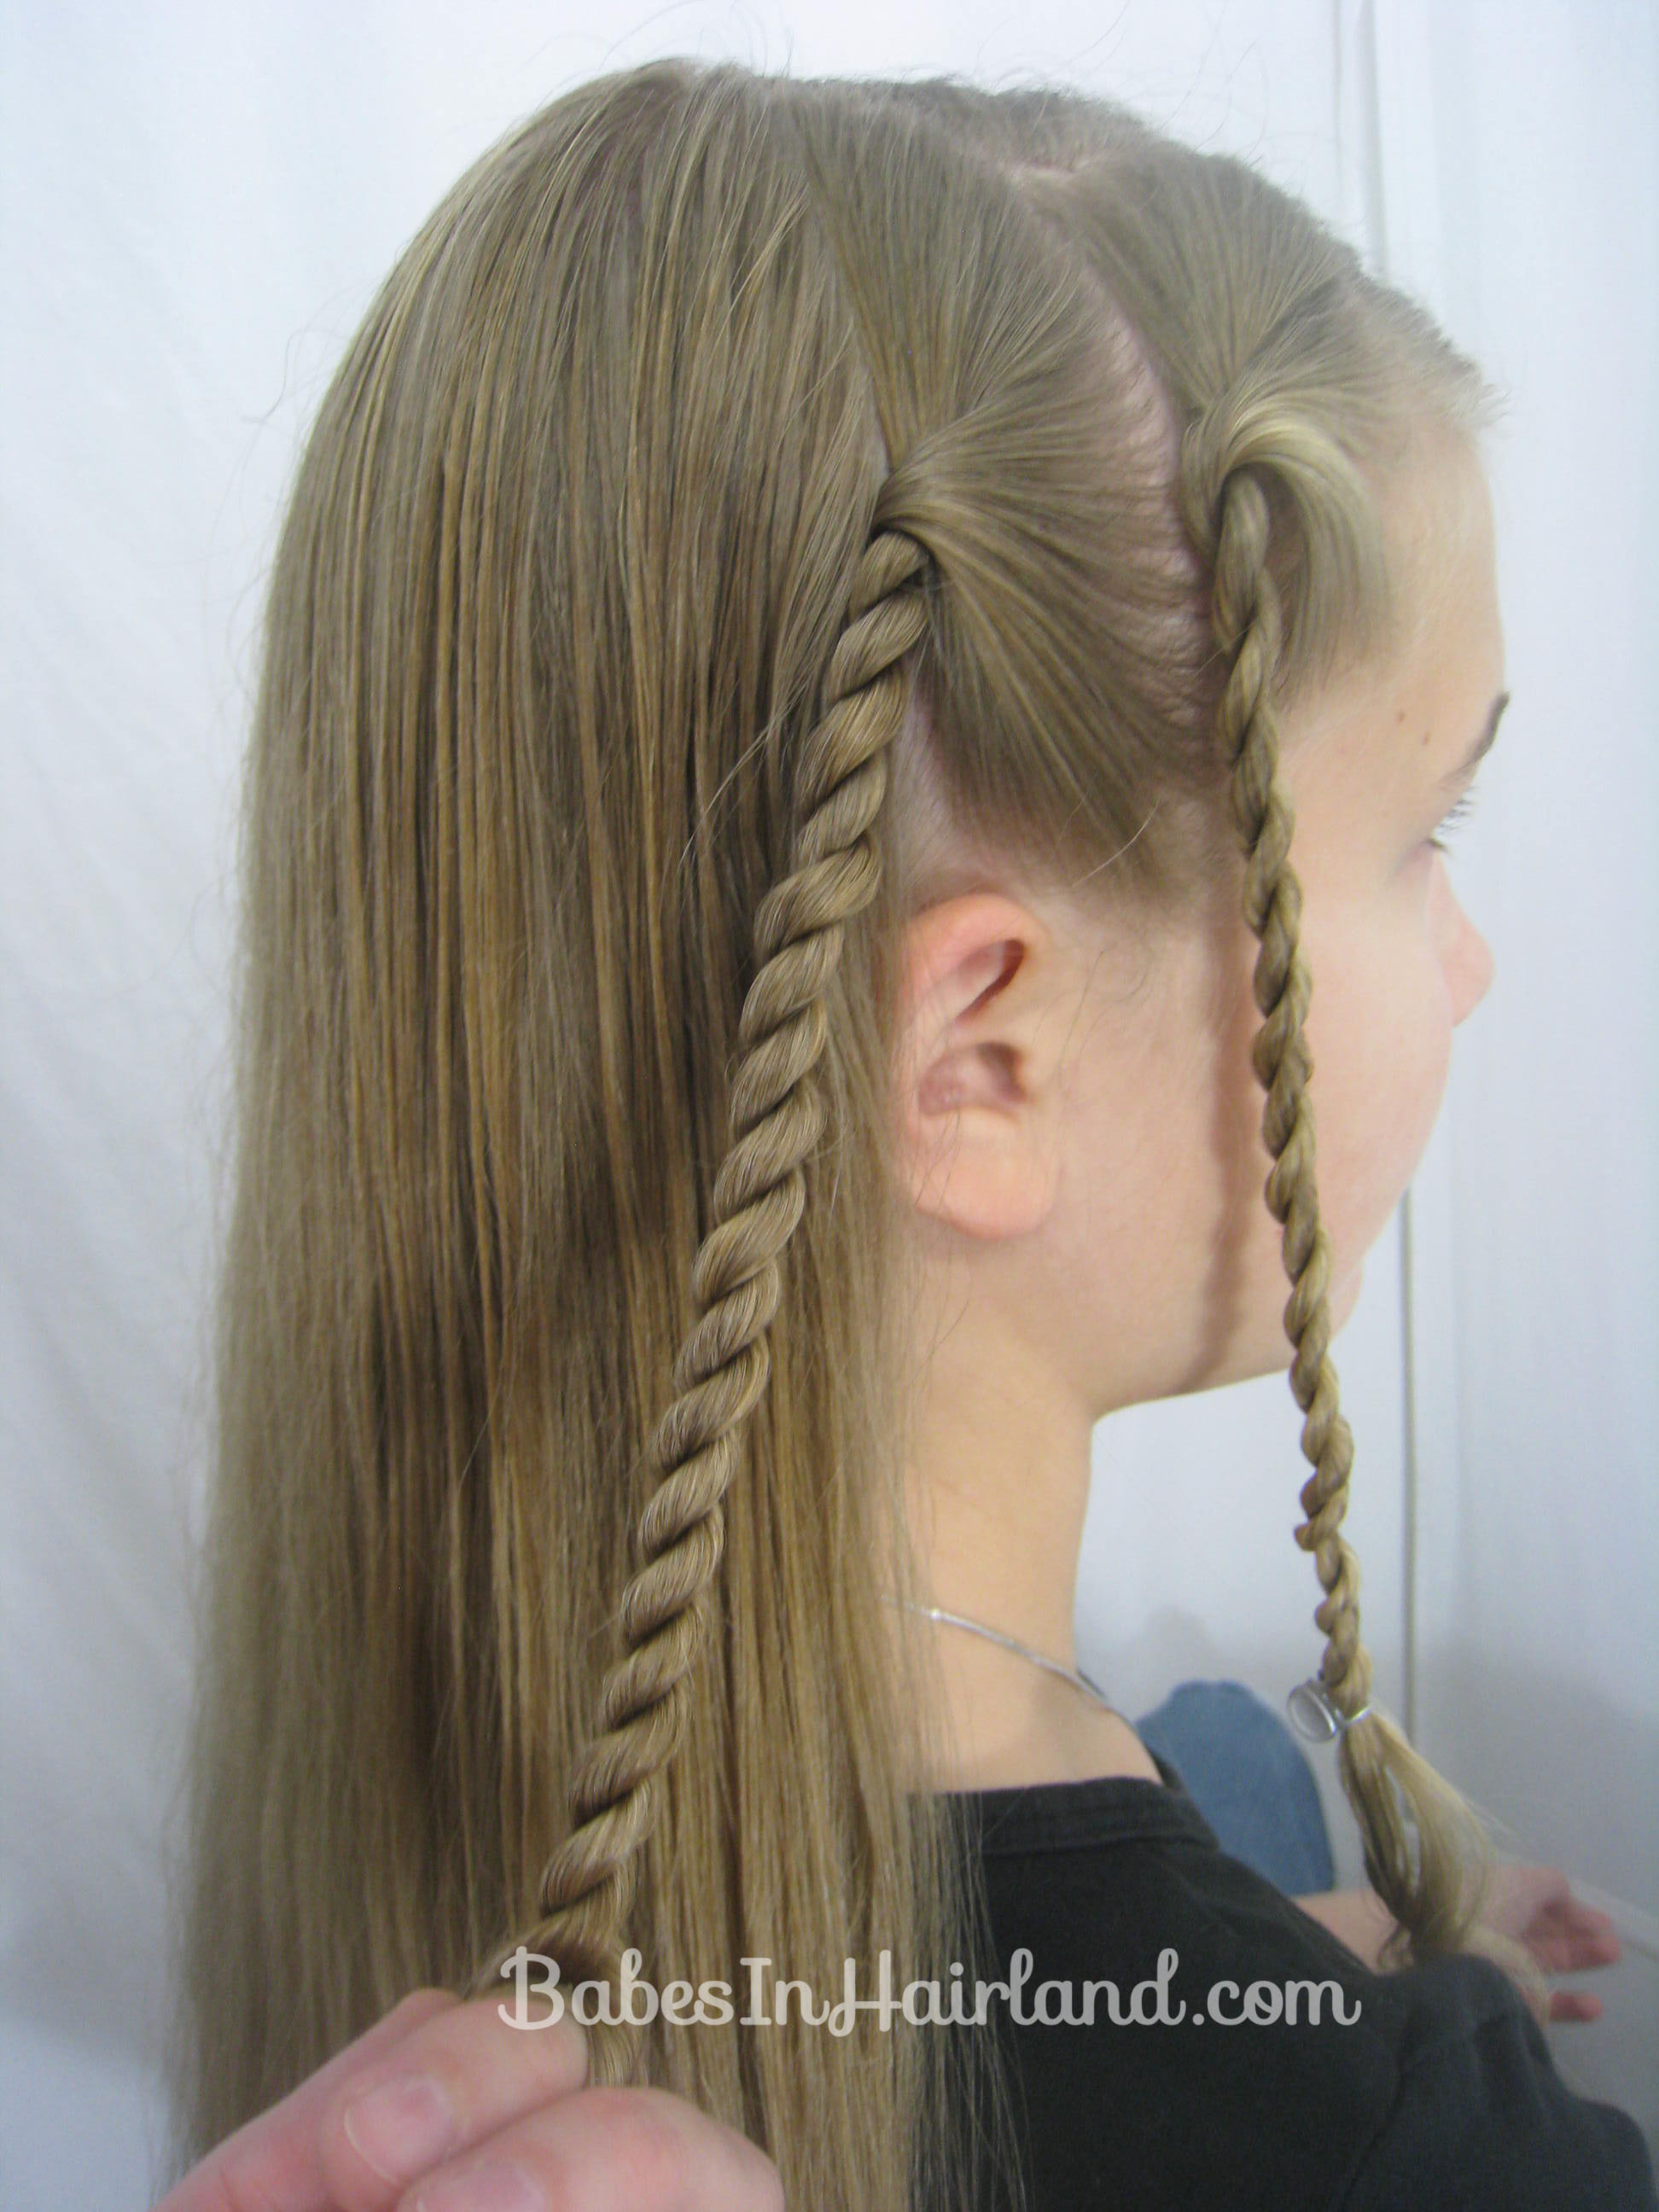 Rope Braid Hairstyle - Babes In Hairland